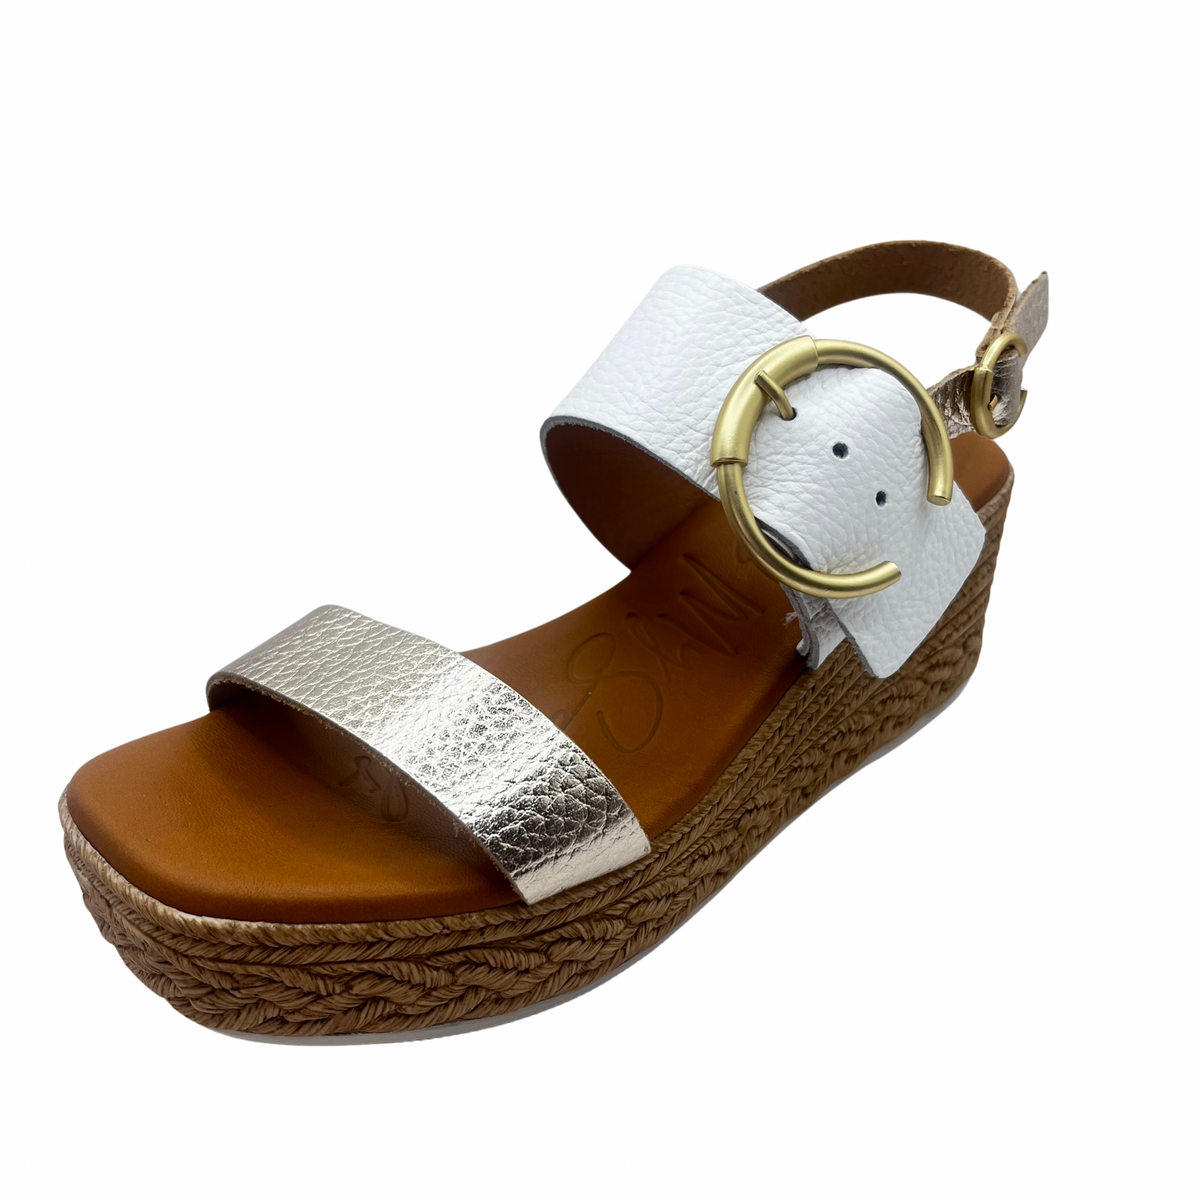 Oh My Sandals Woven Wedge White and Gold Leather Sandal